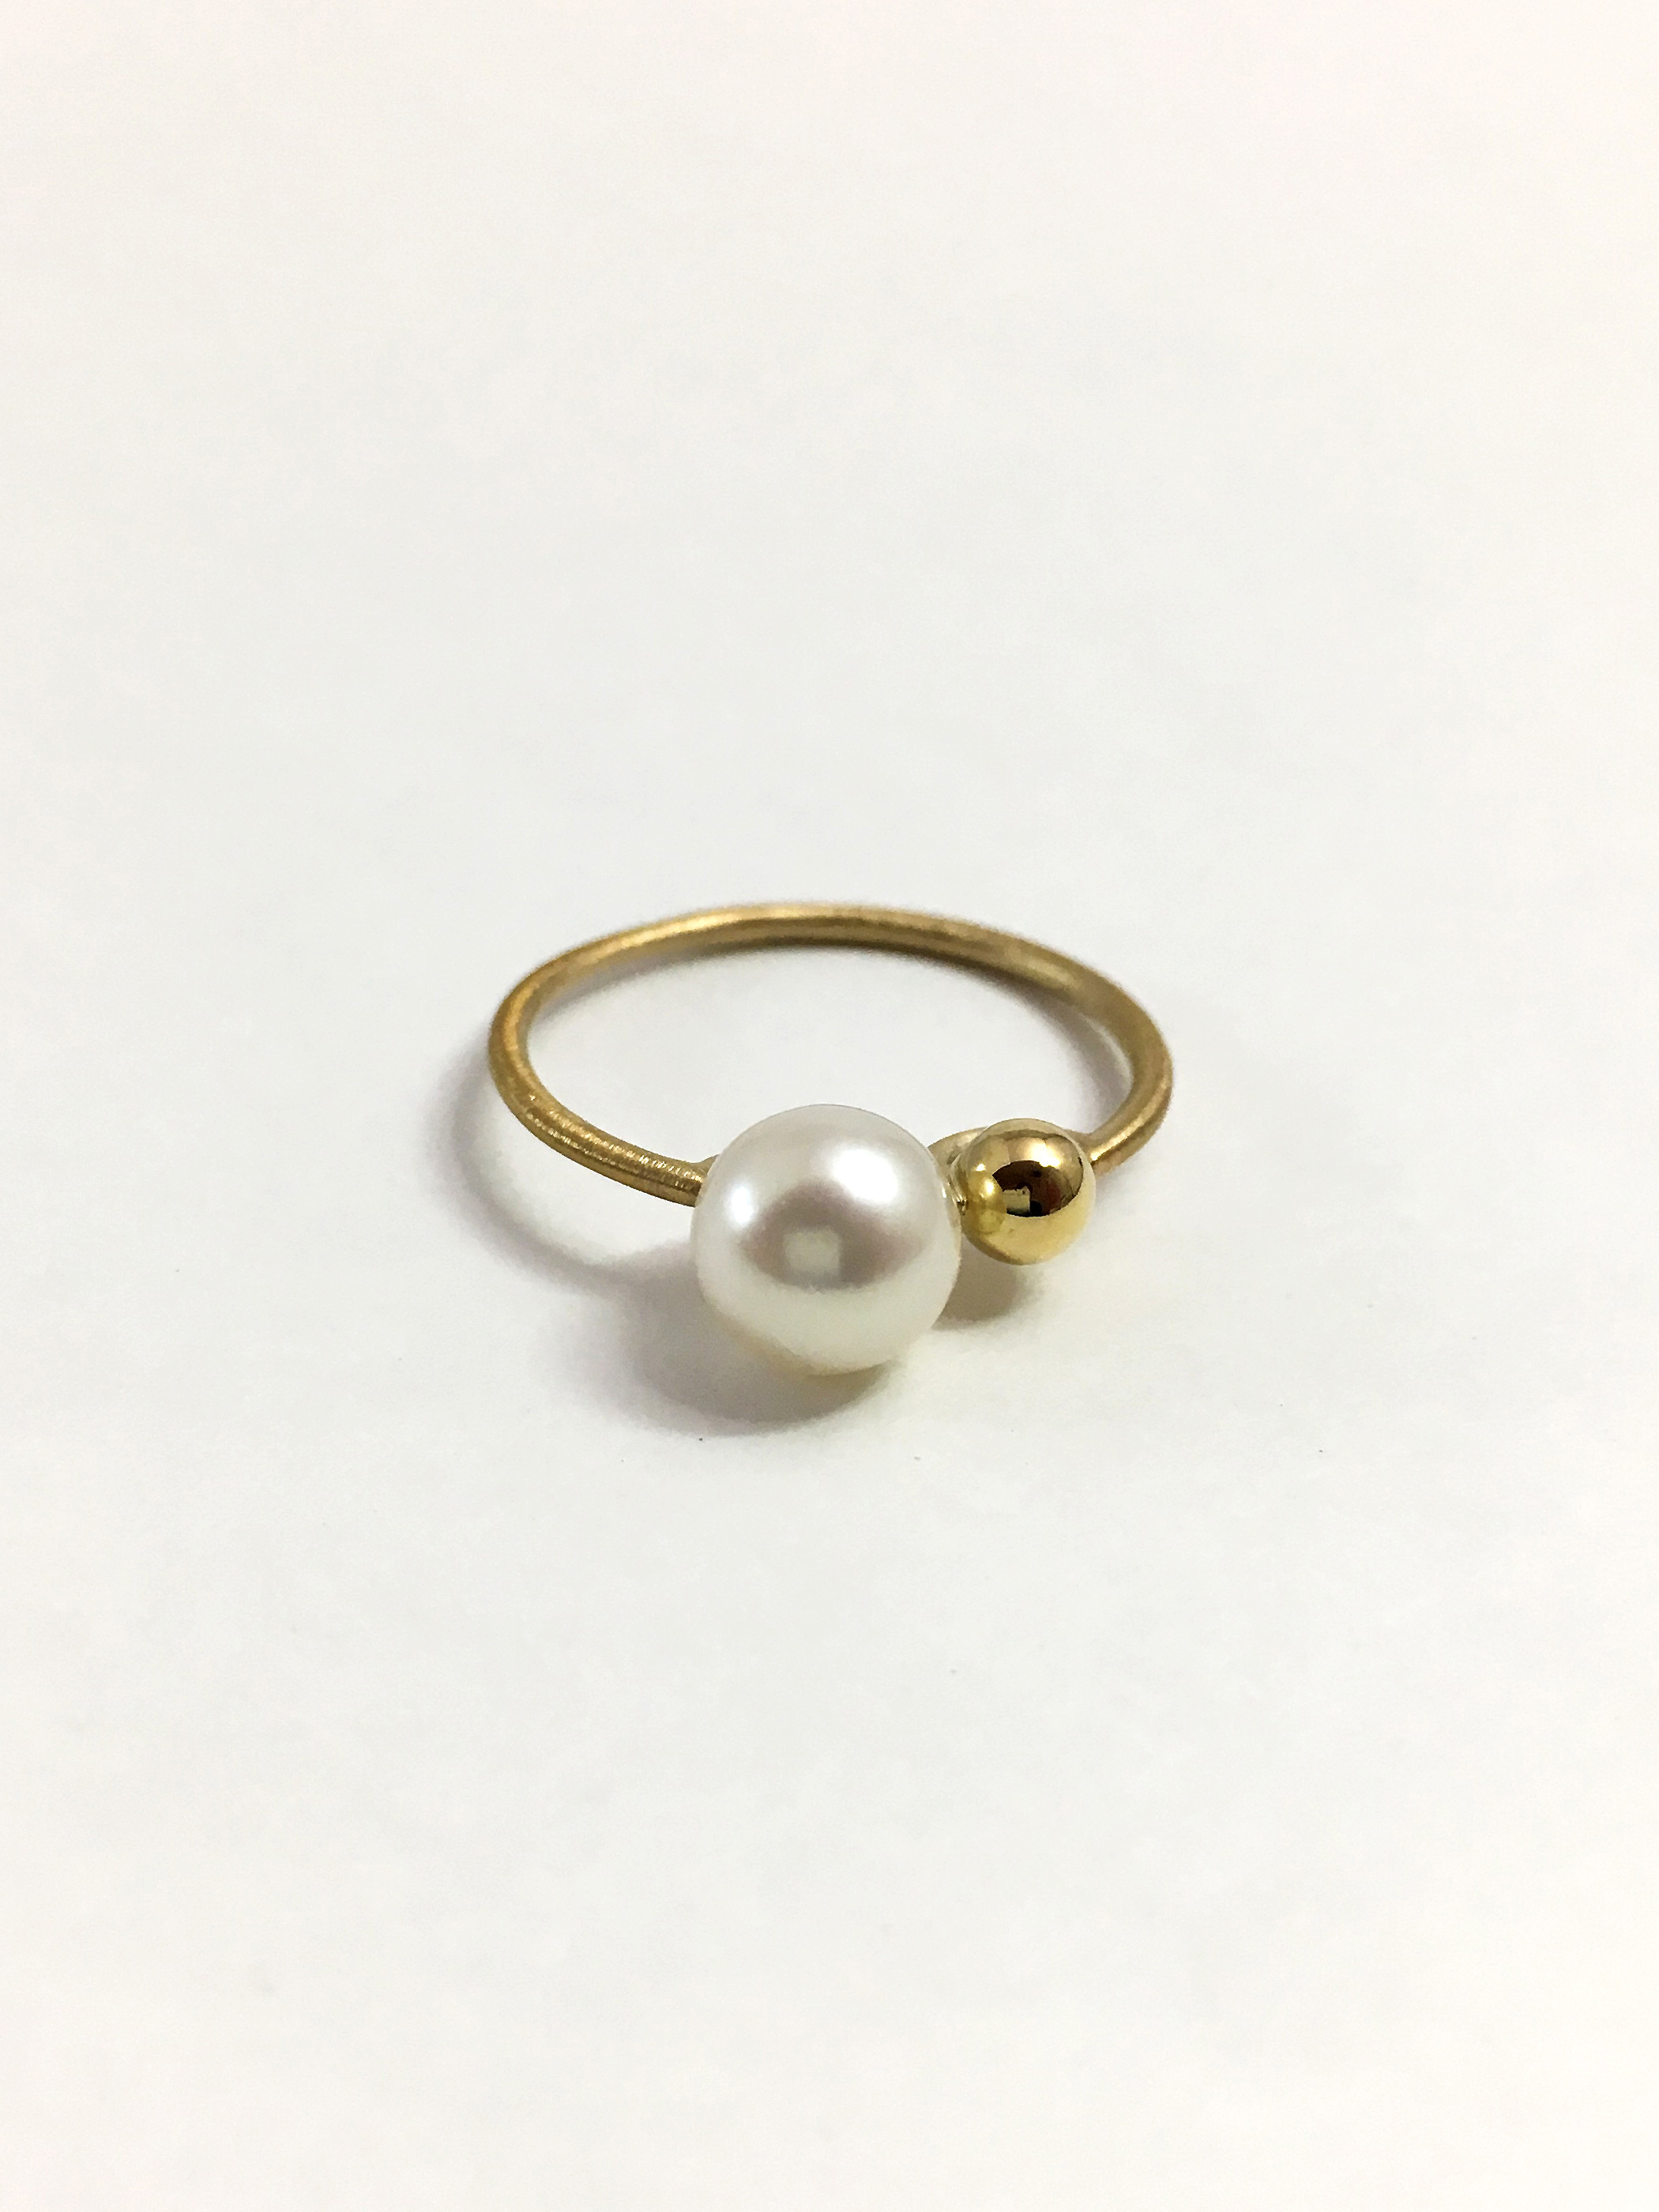 2 BUNNY TAIL RING